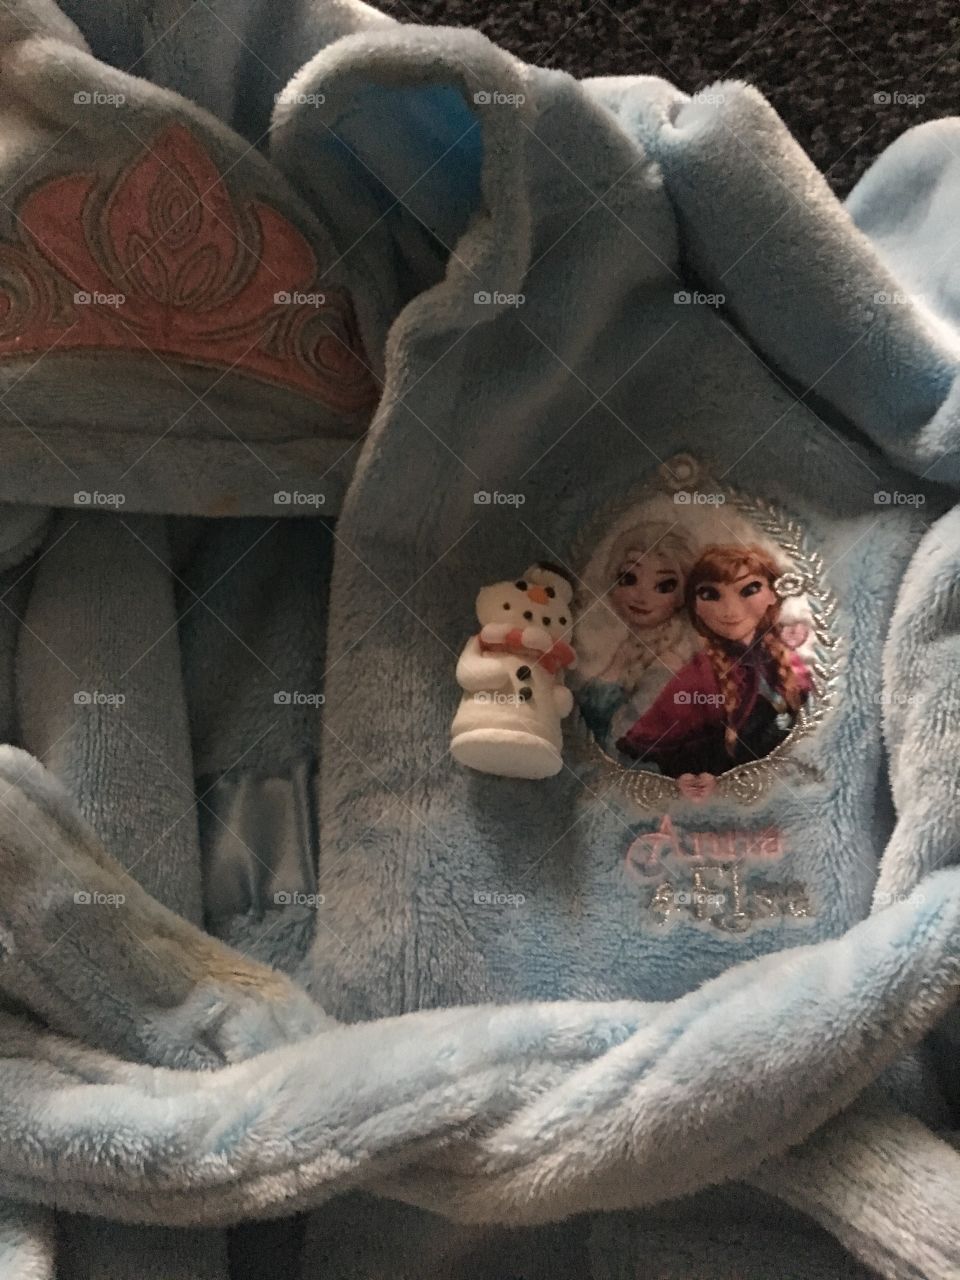 Frozen and snow man 